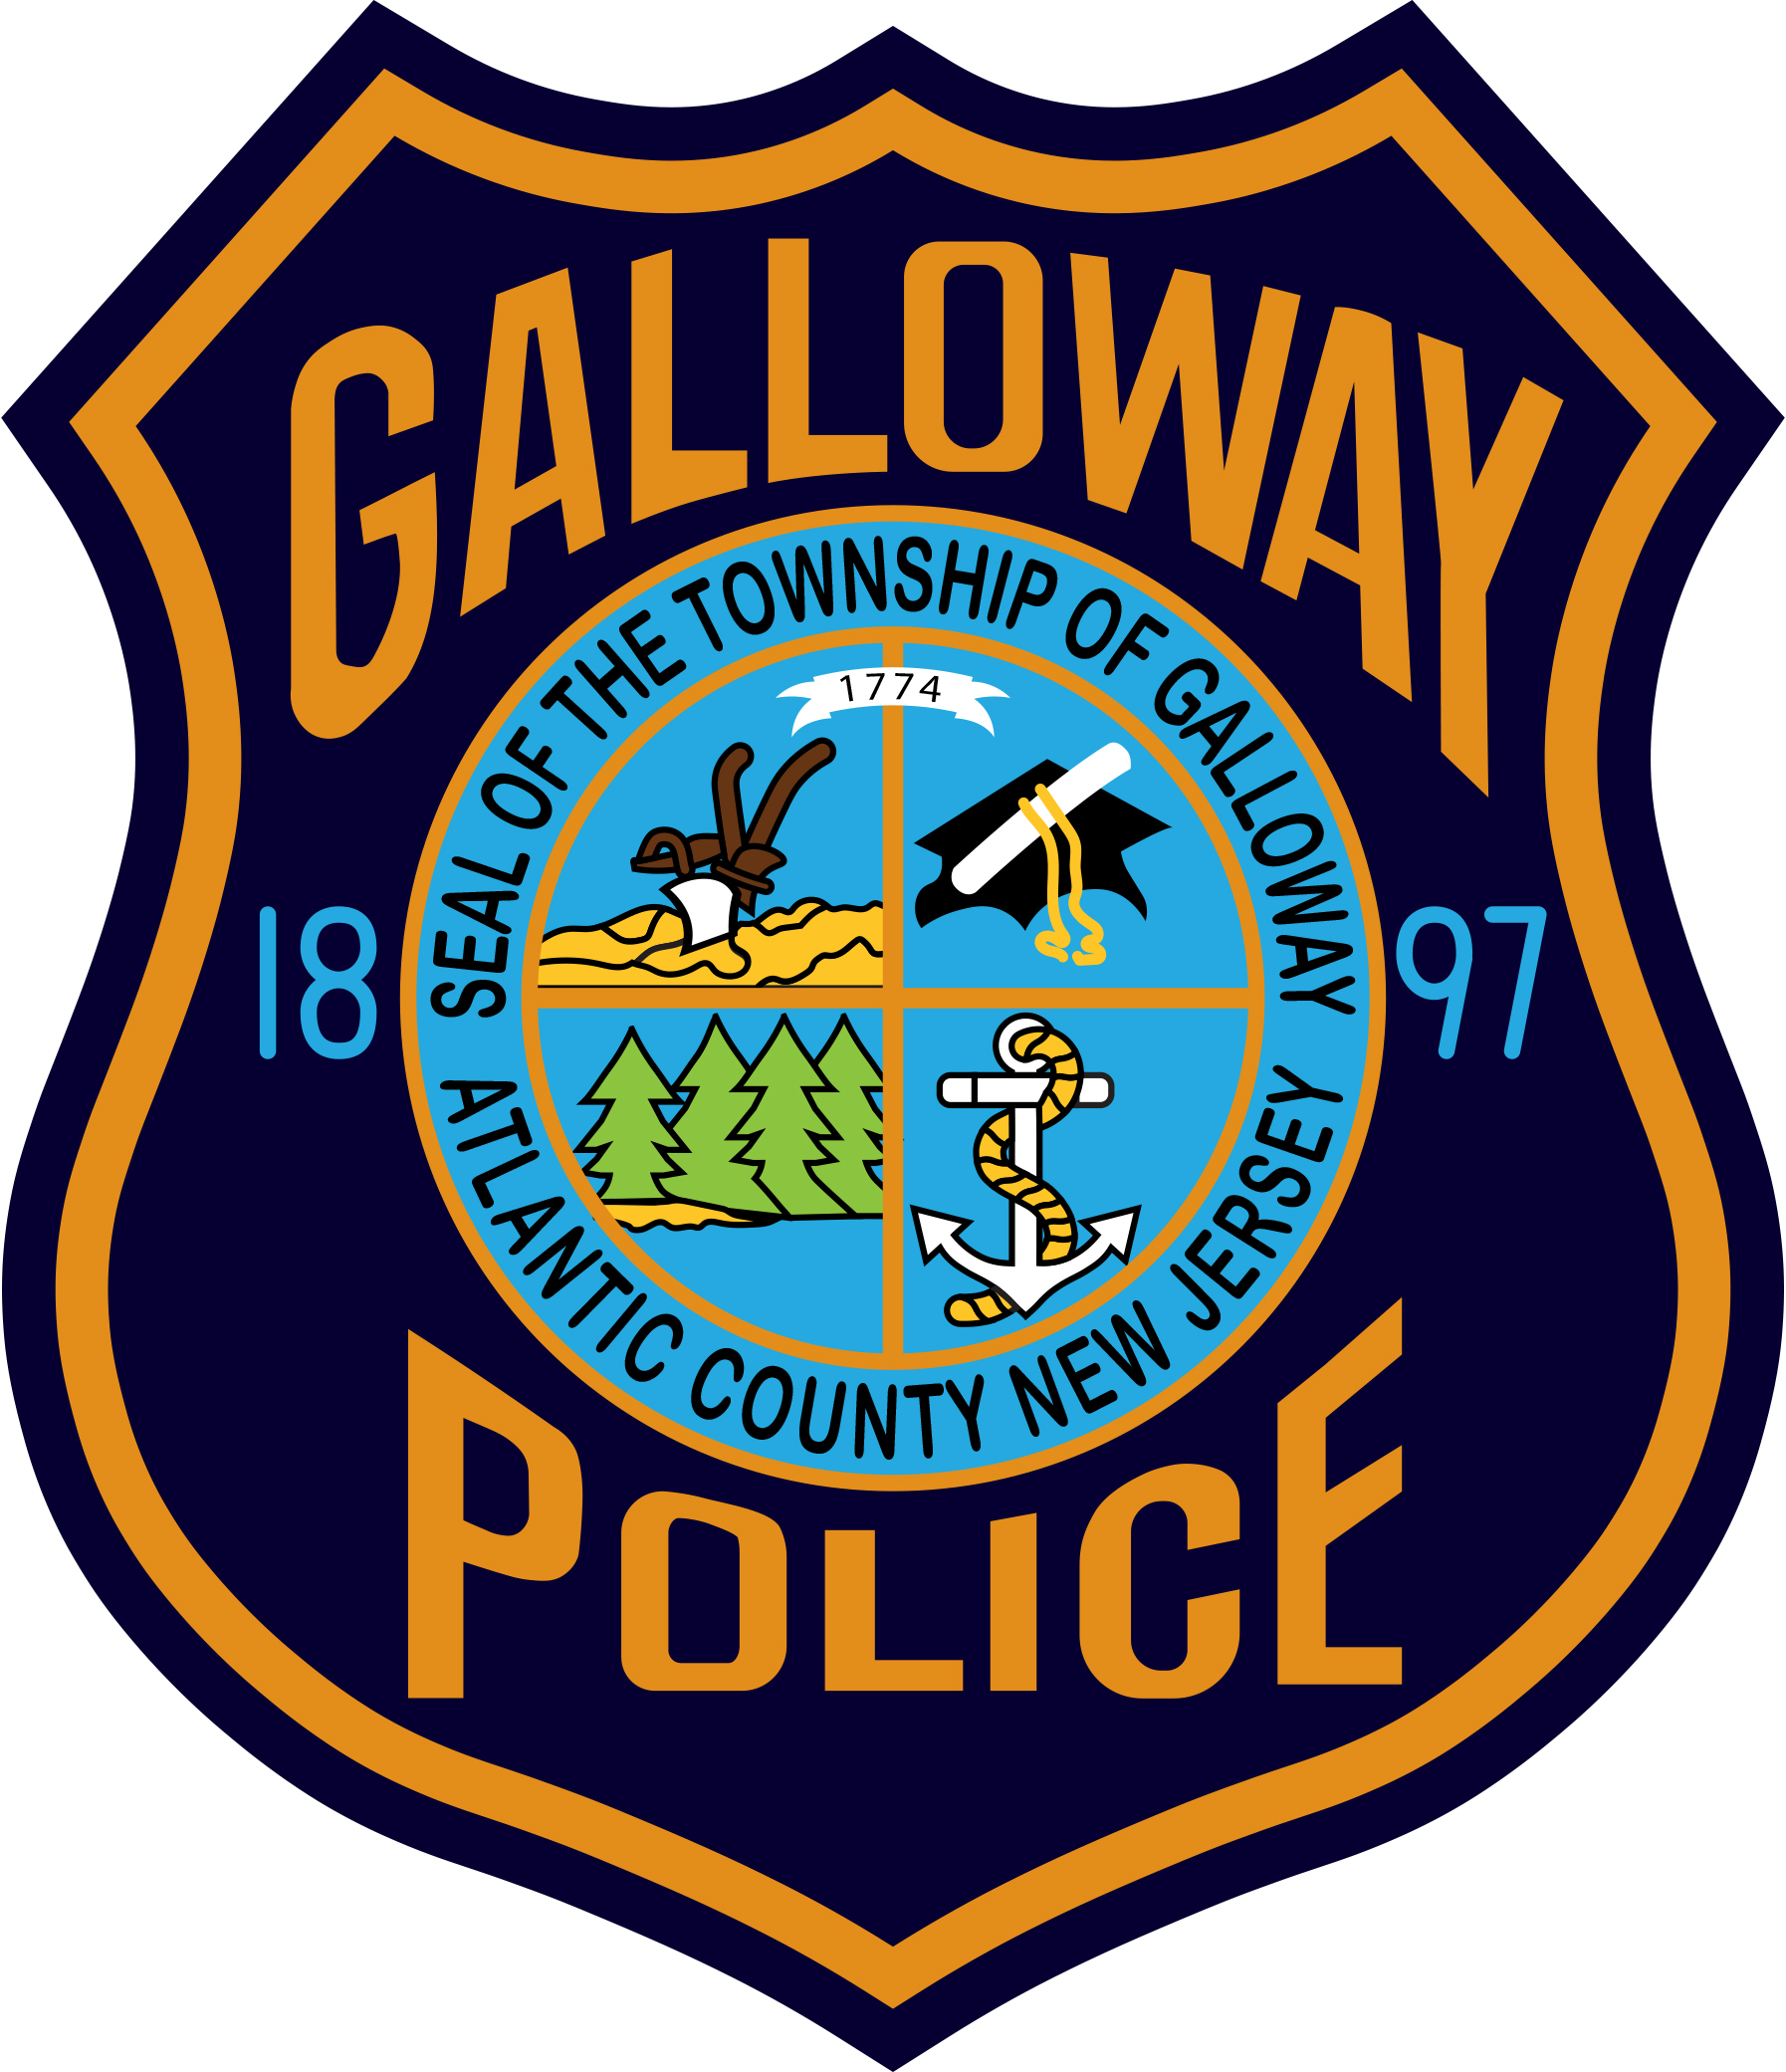 Galloway Township, NJ Police Jobs Entry Level PoliceApp